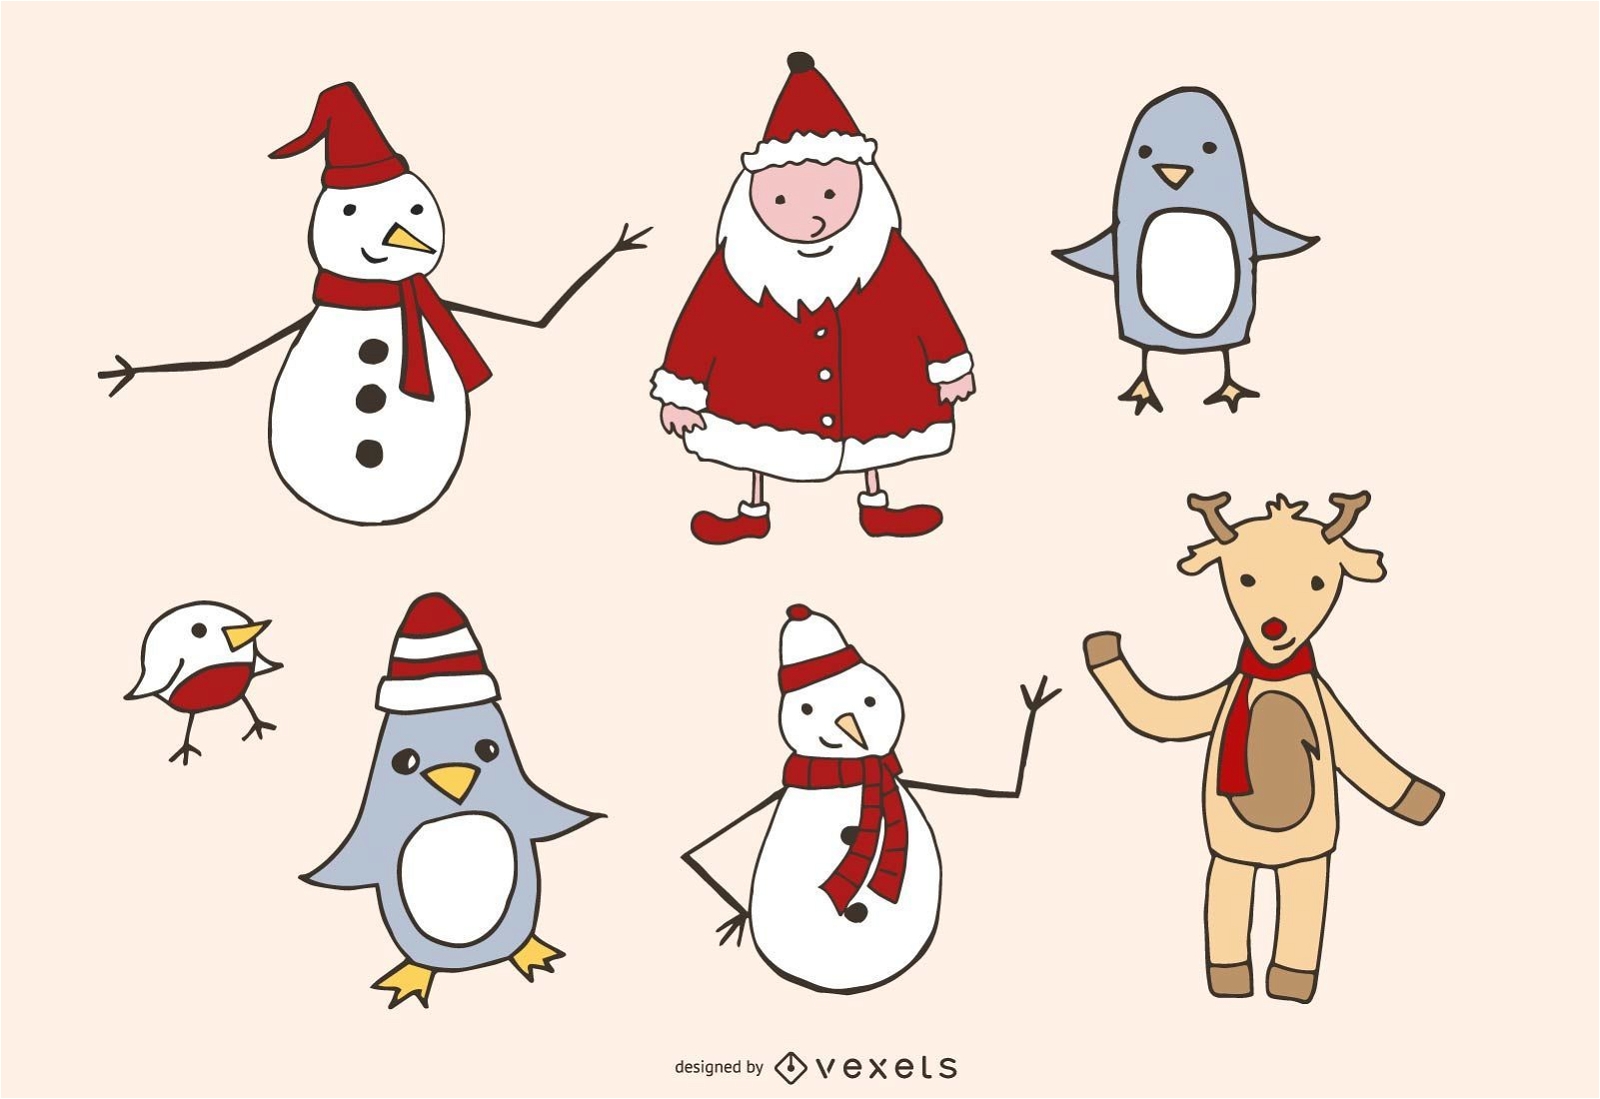 Christmas Themed Sketchy Vector Graphics Pack